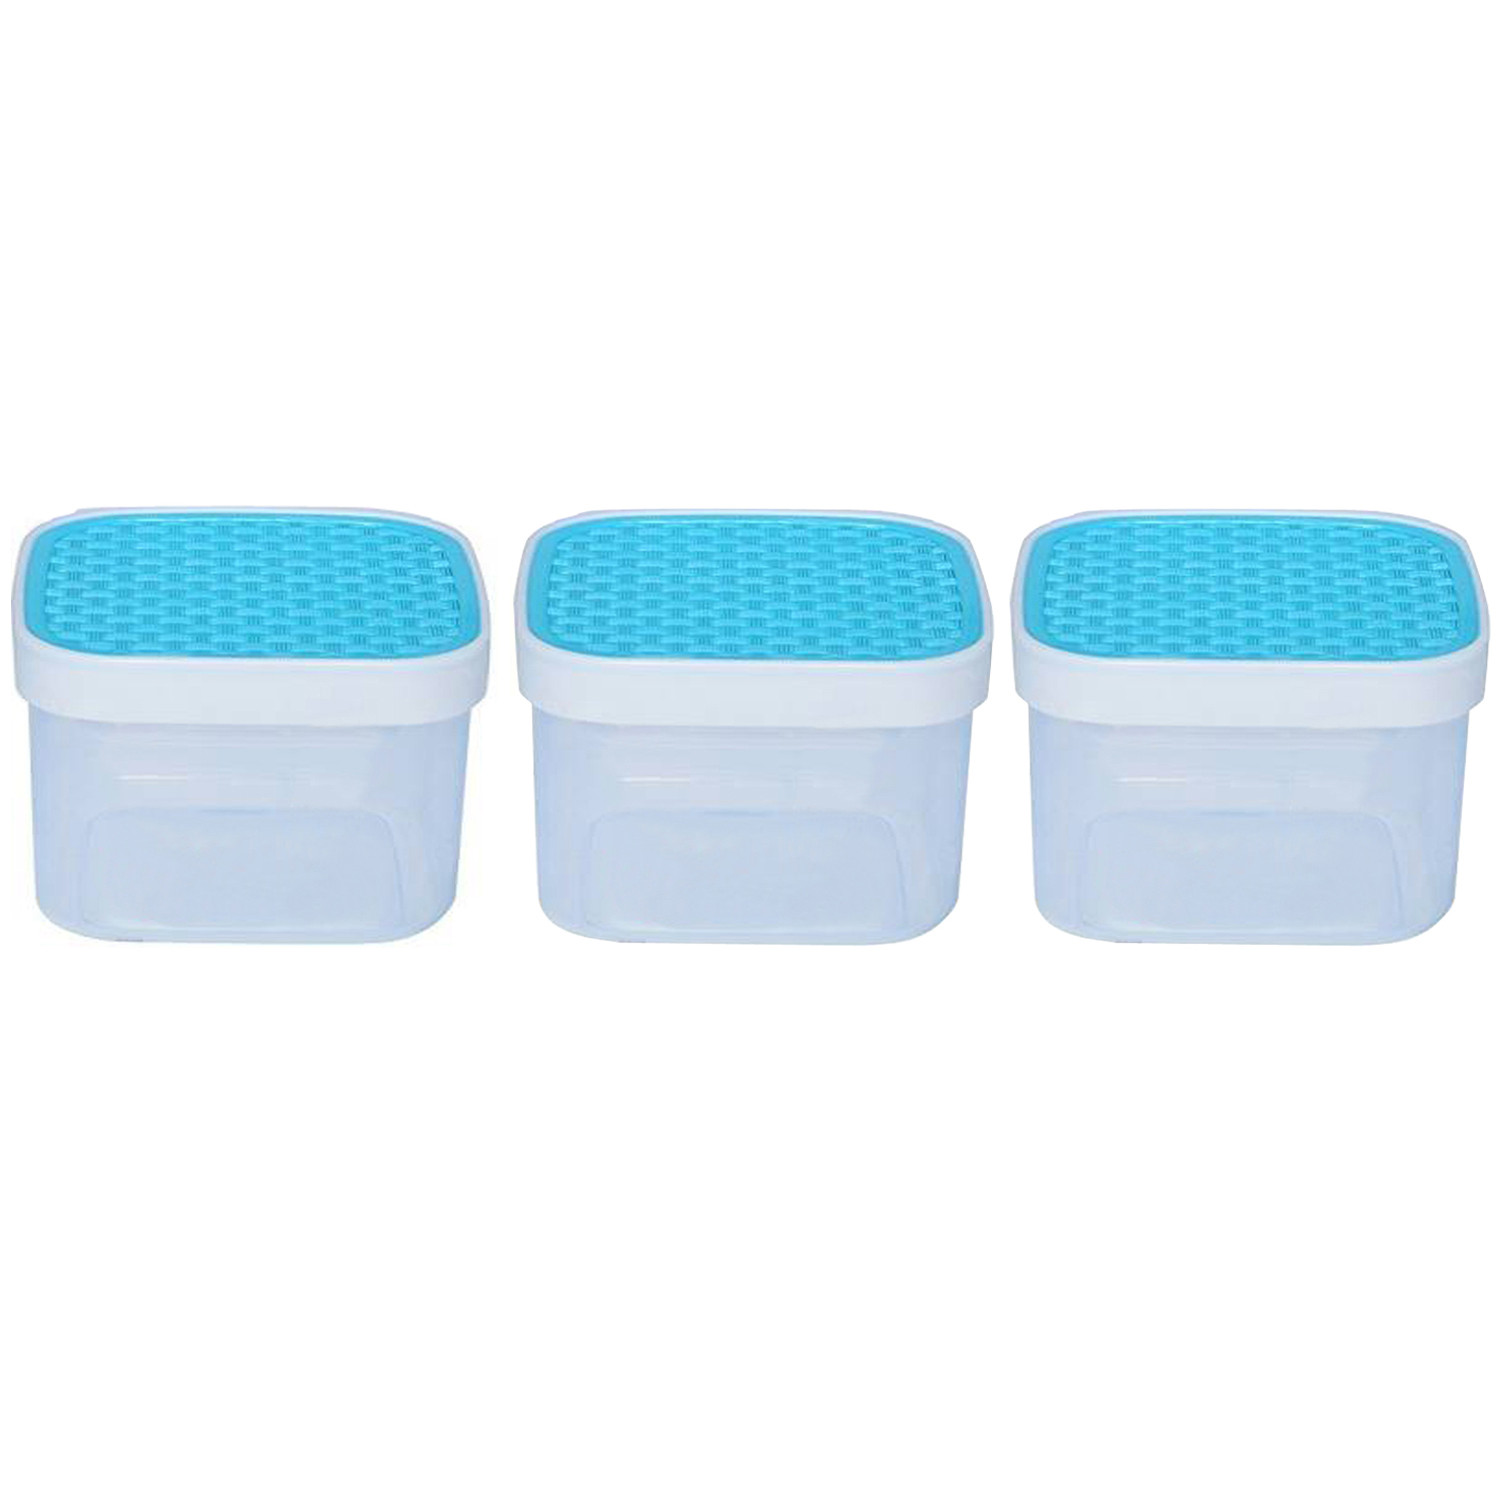 Kuber Industries Check Deisgn Lid  Multi Purpose Plastic Container,1200ml, Set of 6 (Grey & Blue)